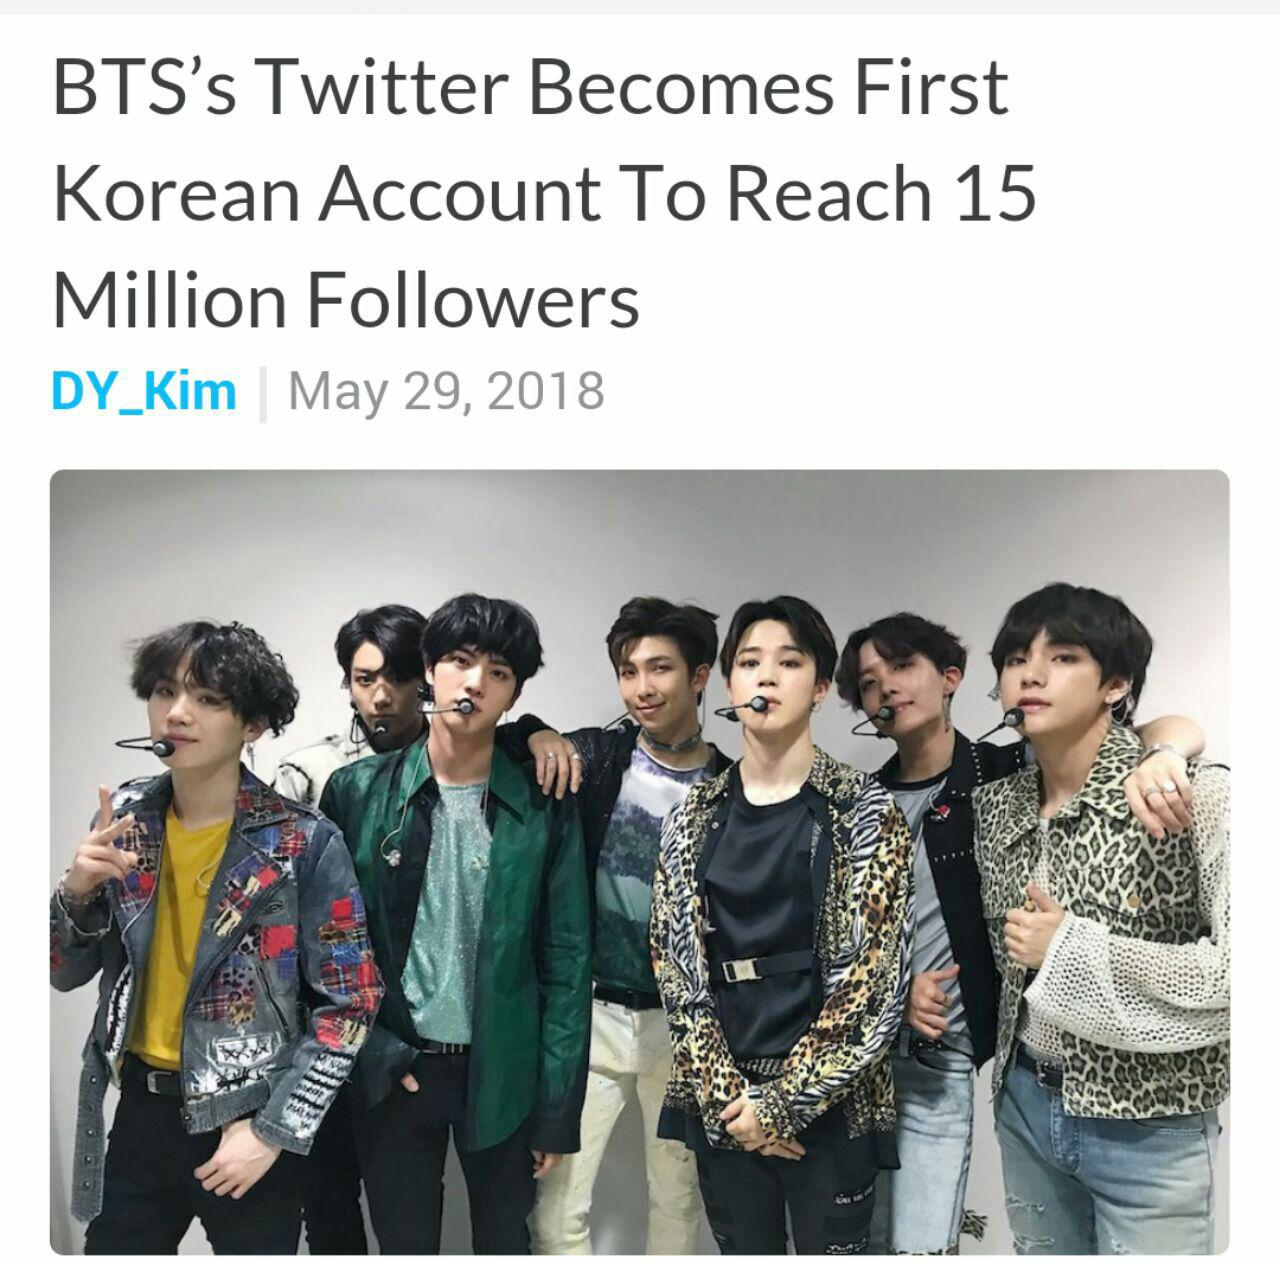 ukgj photo 2018 05 30 19 51 20 - BTS's Twitter Vecomes First koream Account To Reach 15 Milion Flolowers